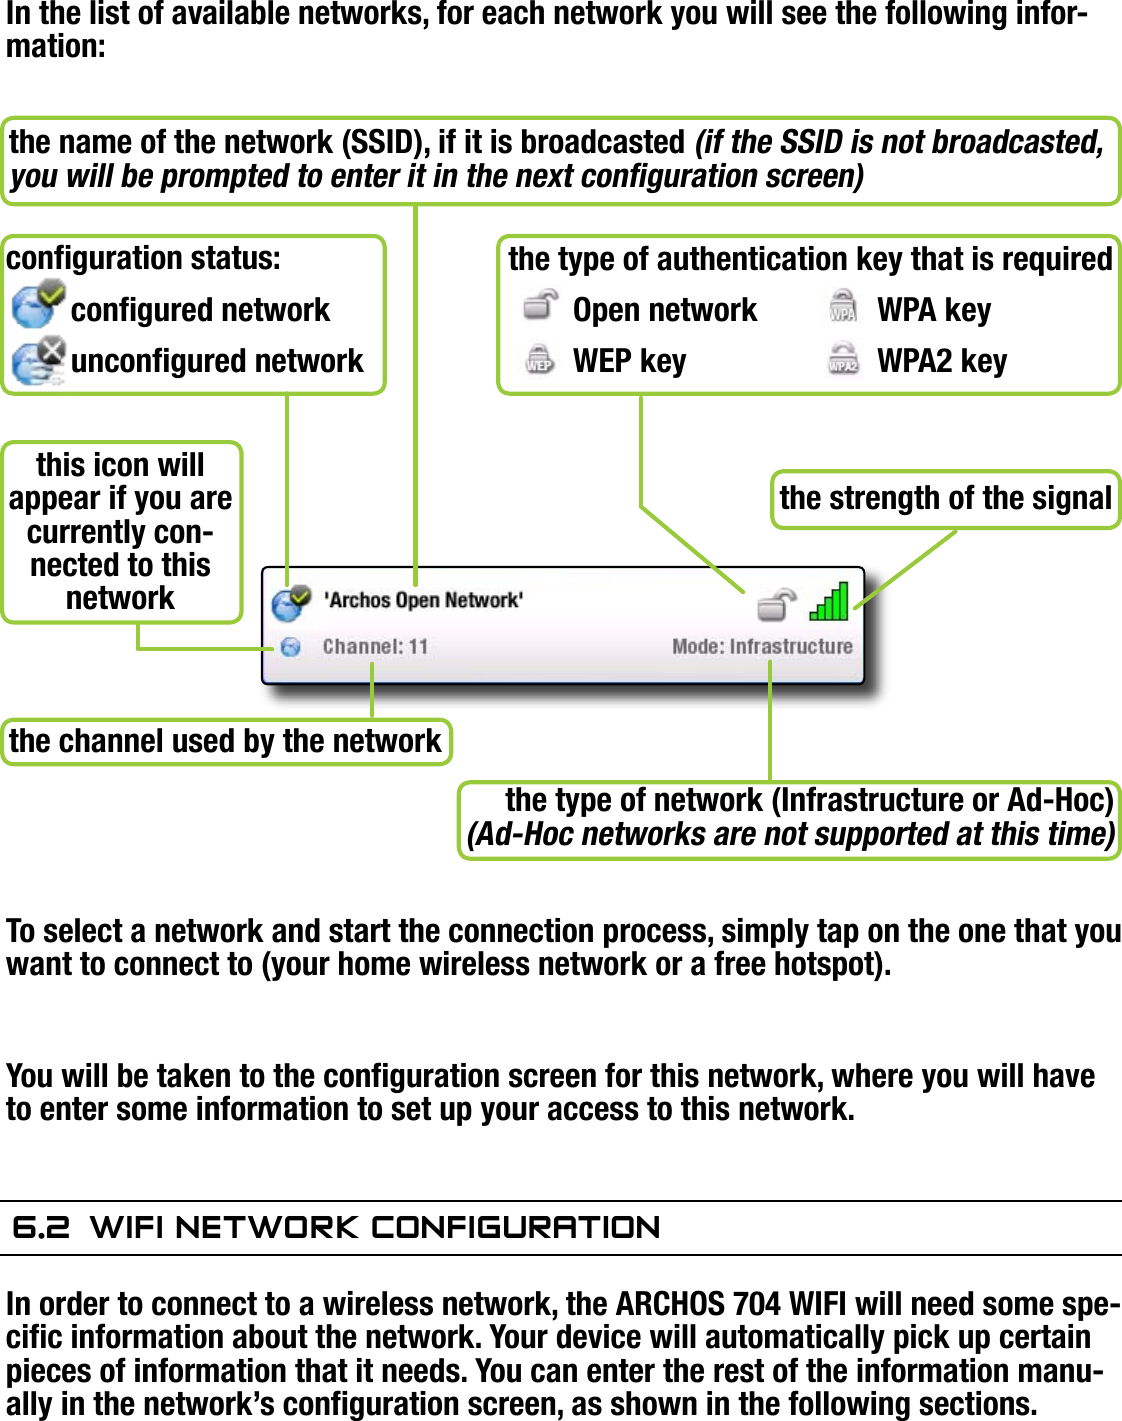 704MANUAL V0.0CONNECTING TO A WIFI NETWORK   &gt;   p. 38In the list of available networks, for each network you will see the following infor-mation:the strength of the signalthe name of the network (SSID), if it is broadcasted (if the SSID is not broadcasted, you will be prompted to enter it in the next conguration screen)the channel used by the networkthe type of network (Infrastructure or Ad-Hoc) (Ad-Hoc networks are not supported at this time)the type of authentication key that is requiredOpen network    WPA keyWEP key      WPA2 keythis icon will appear if you are currently con-nected to this networkconguration status:congured networkuncongured networkTo select a network and start the connection process, simply tap on the one that you want to connect to (your home wireless network or a free hotspot). You will be taken to the conguration screen for this network, where you will have to enter some information to set up your access to this network.6.2  wifi neTwOrk COnfiguraTiOnIn order to connect to a wireless network, the ARCHOS 704 WIFI will need some spe-cic information about the network. Your device will automatically pick up certain pieces of information that it needs. You can enter the rest of the information manu-ally in the network’s conguration screen, as shown in the following sections.Note that your device will remember the network connection information that you enter, in order to re-use it and connect automatically to the network when it is in range.